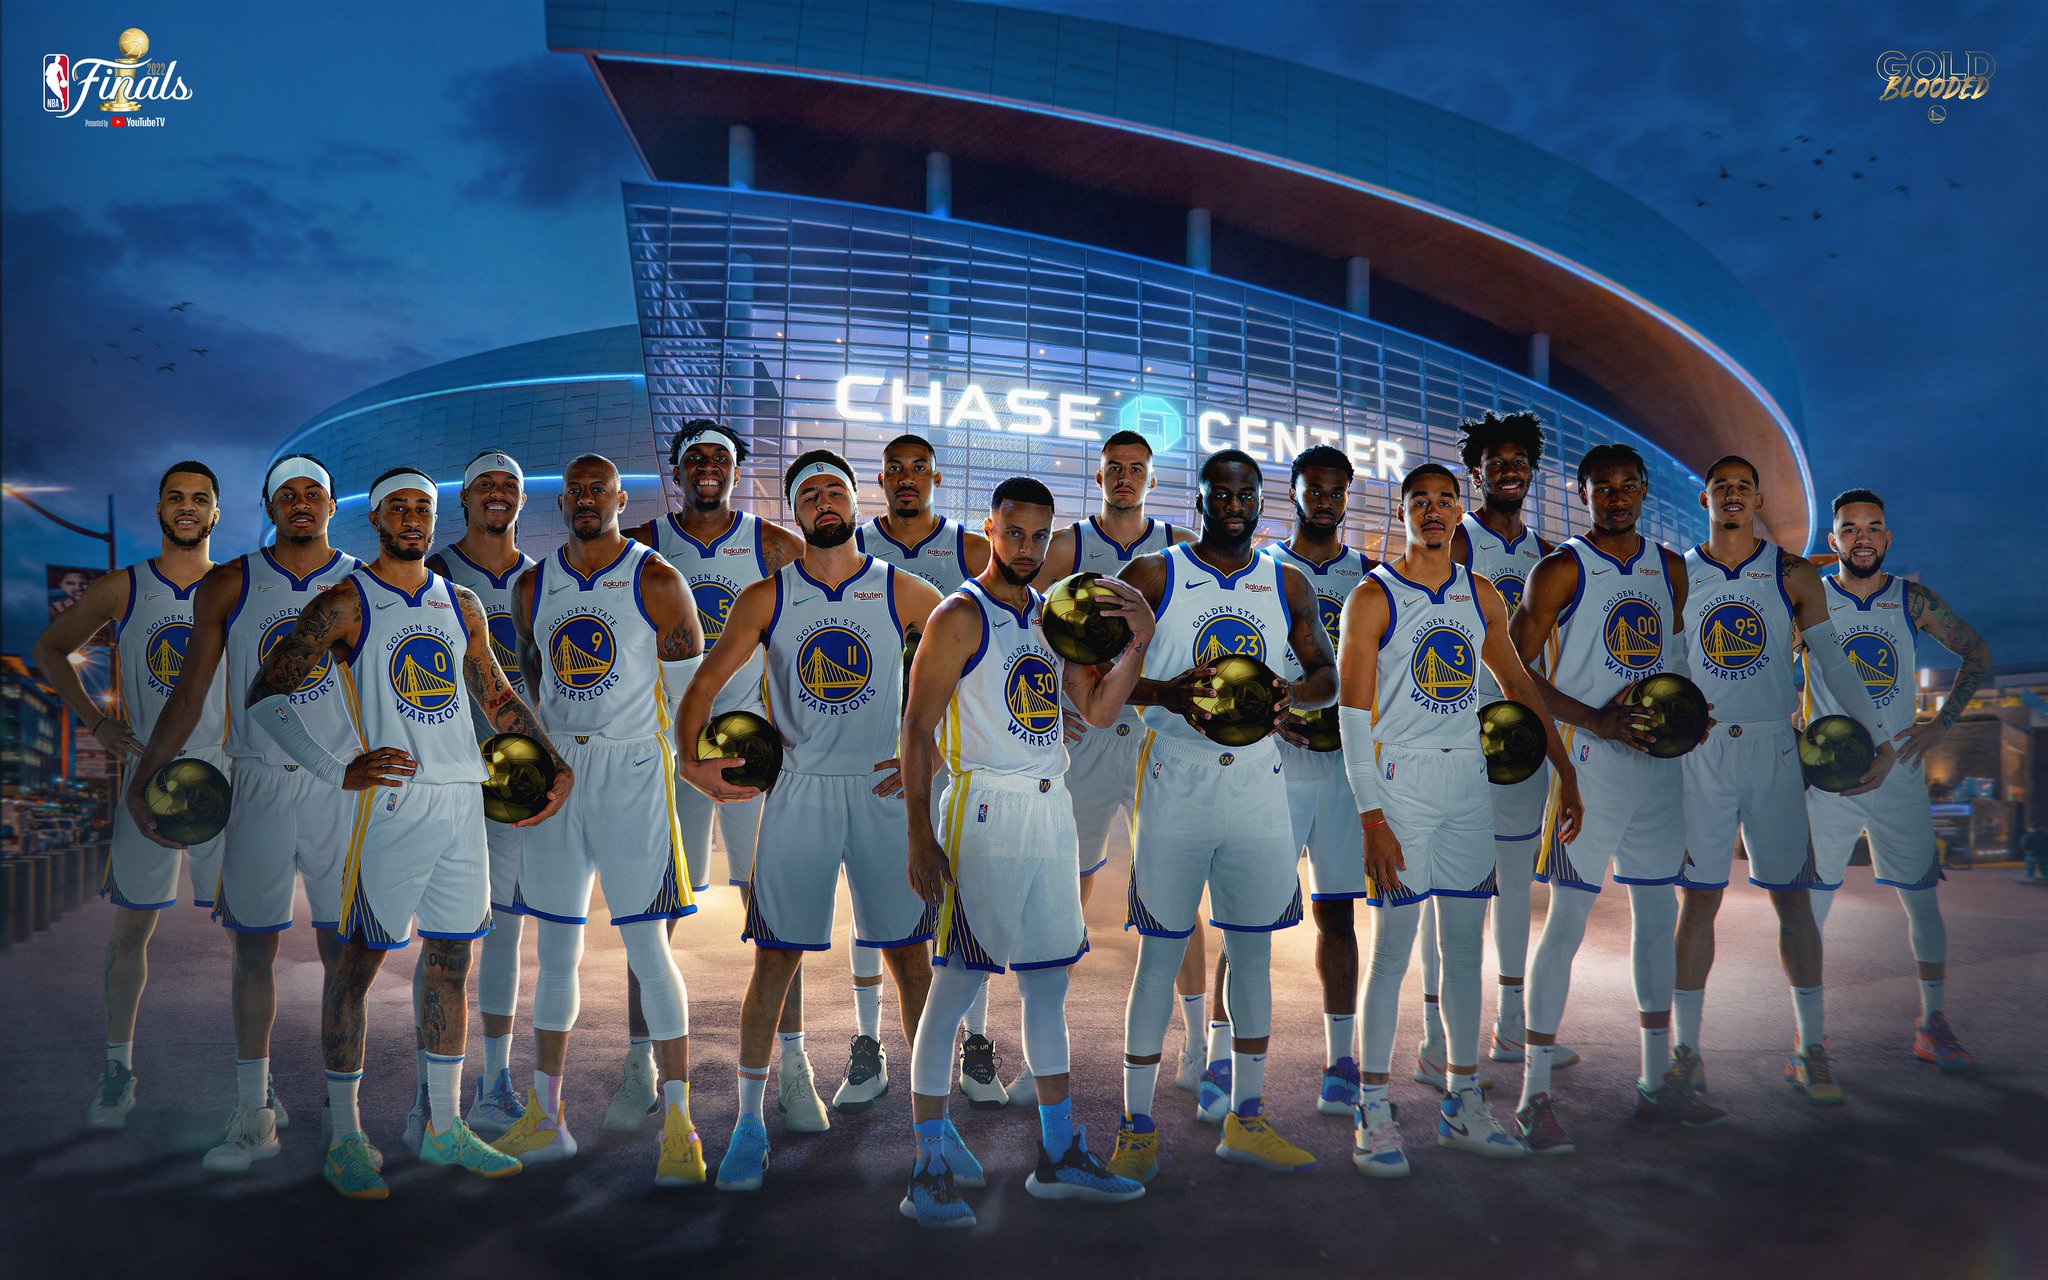 The new Golden State Warriors: relentless, ruthless … and oddly